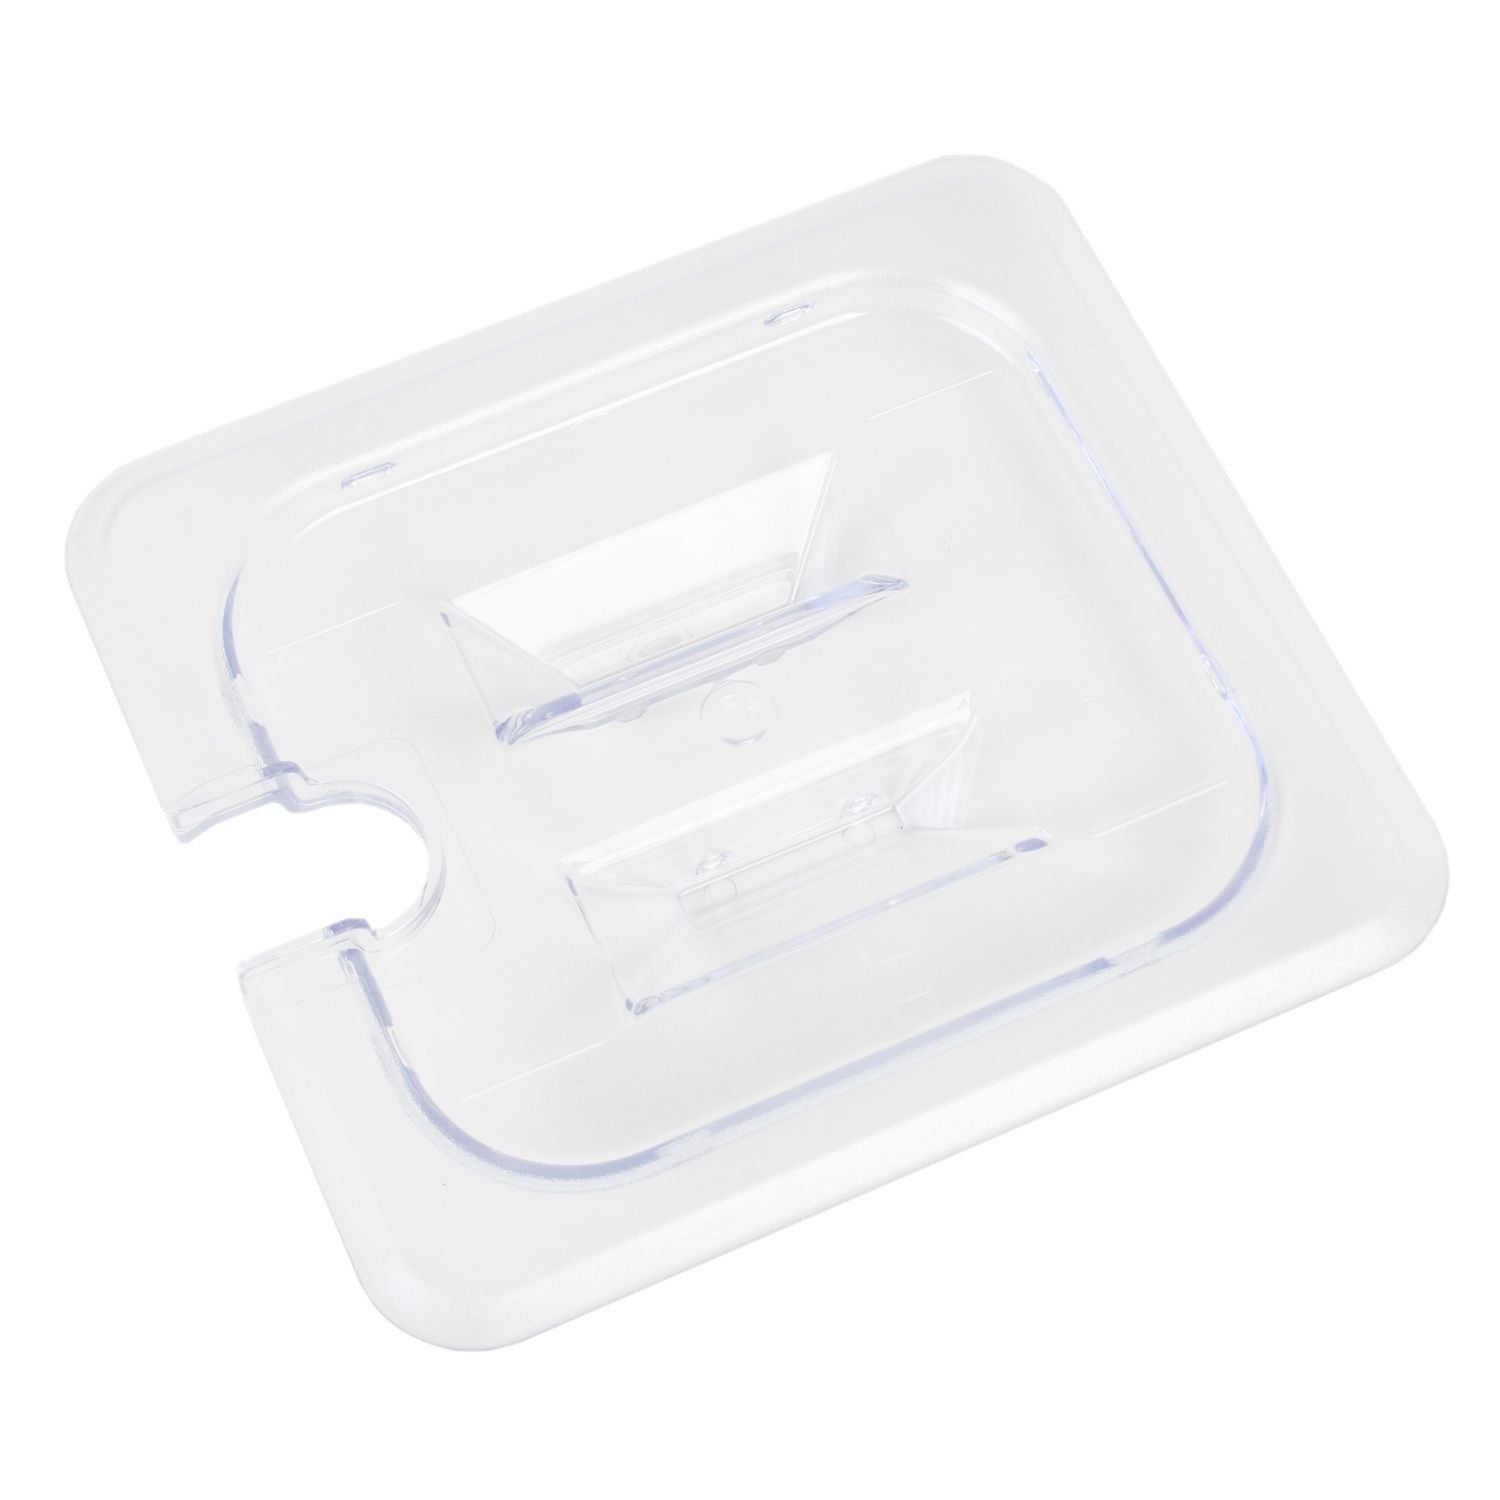 Thunder Group Polycarbonate Slotted Cover For Sixth Size Food Pan